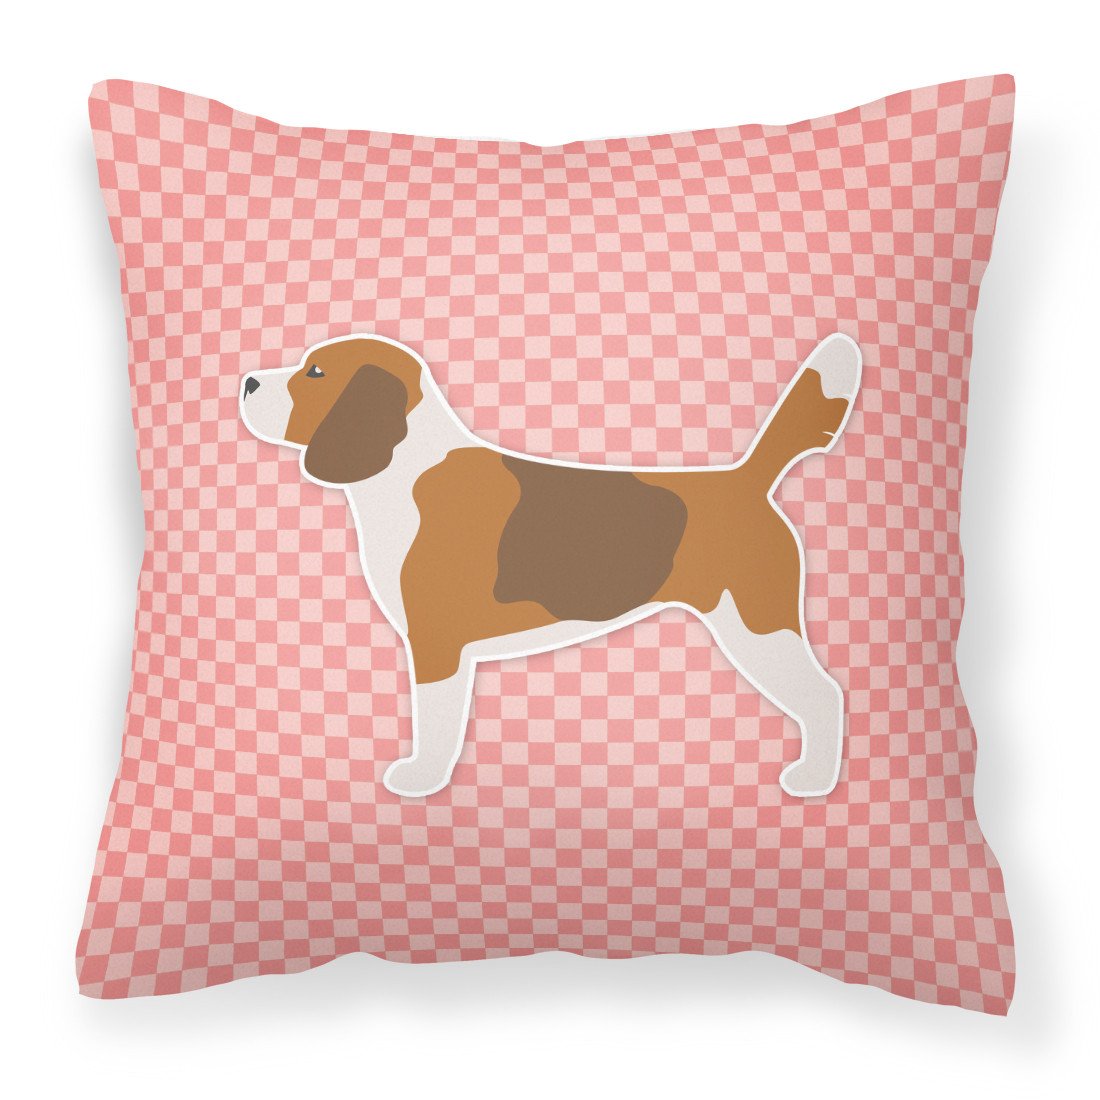 Beagle Checkerboard Pink Fabric Decorative Pillow BB3610PW1818 by Caroline's Treasures